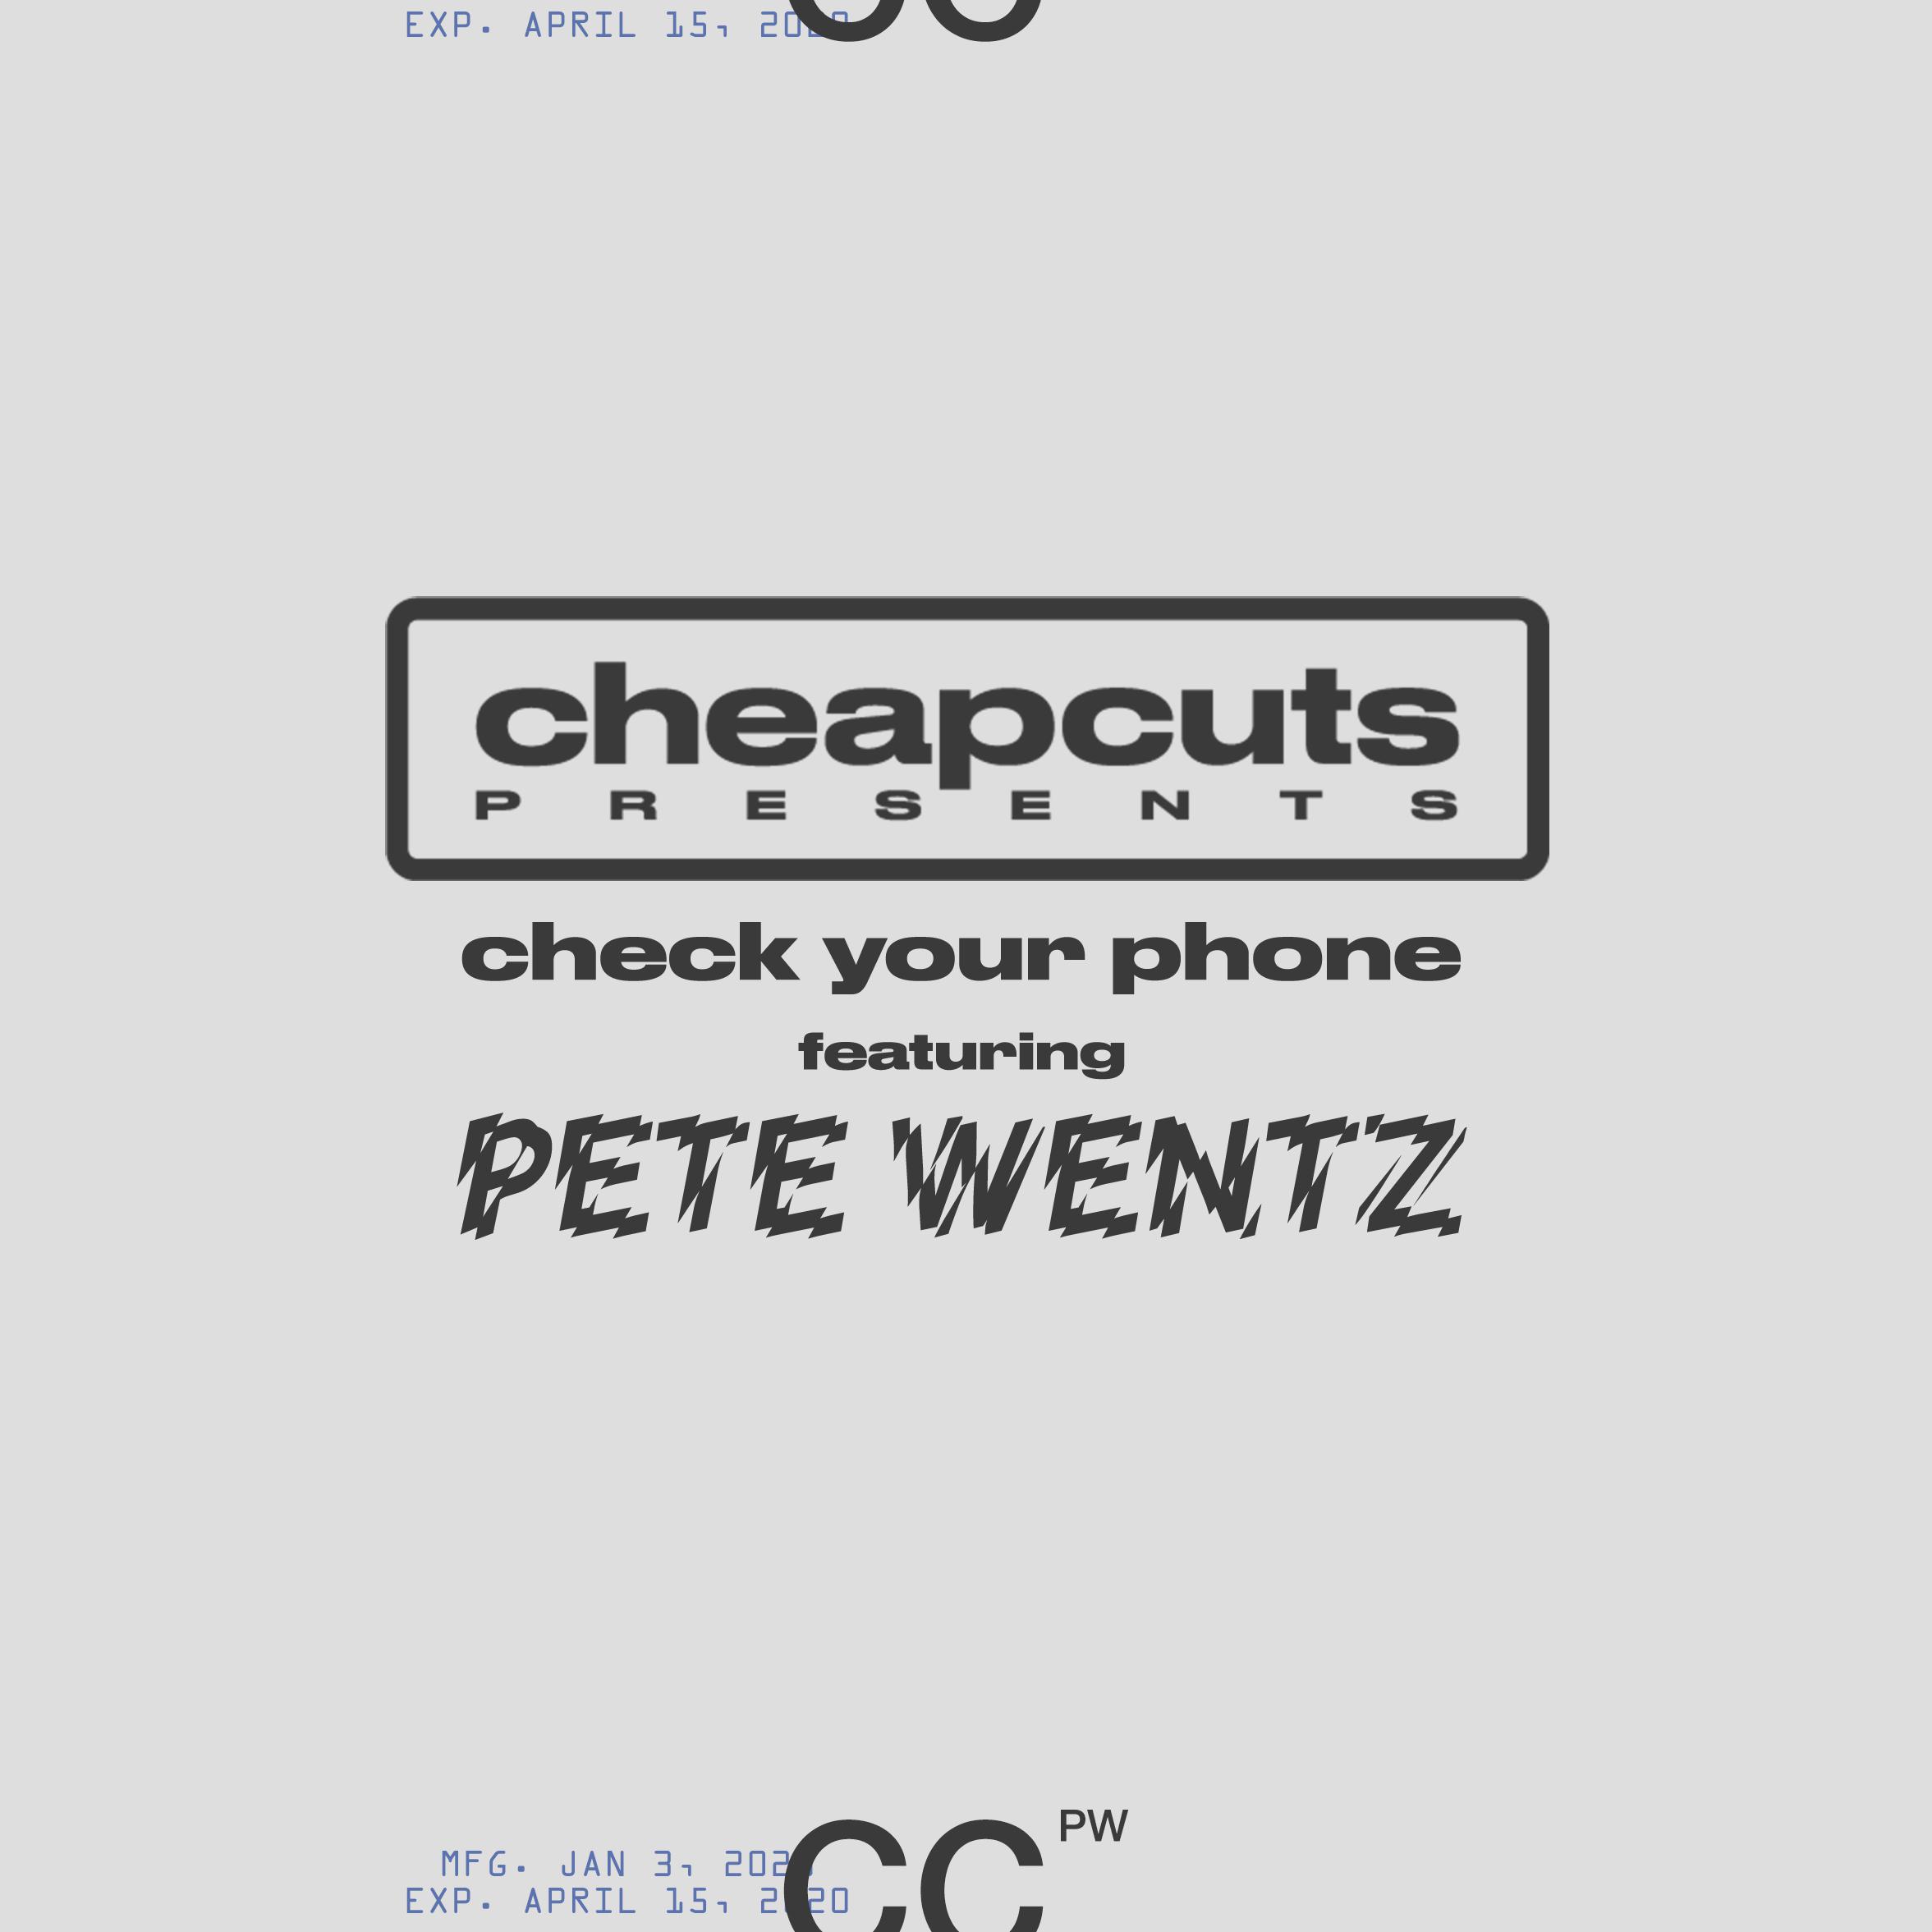 Cheap Cuts - Check Your Phone